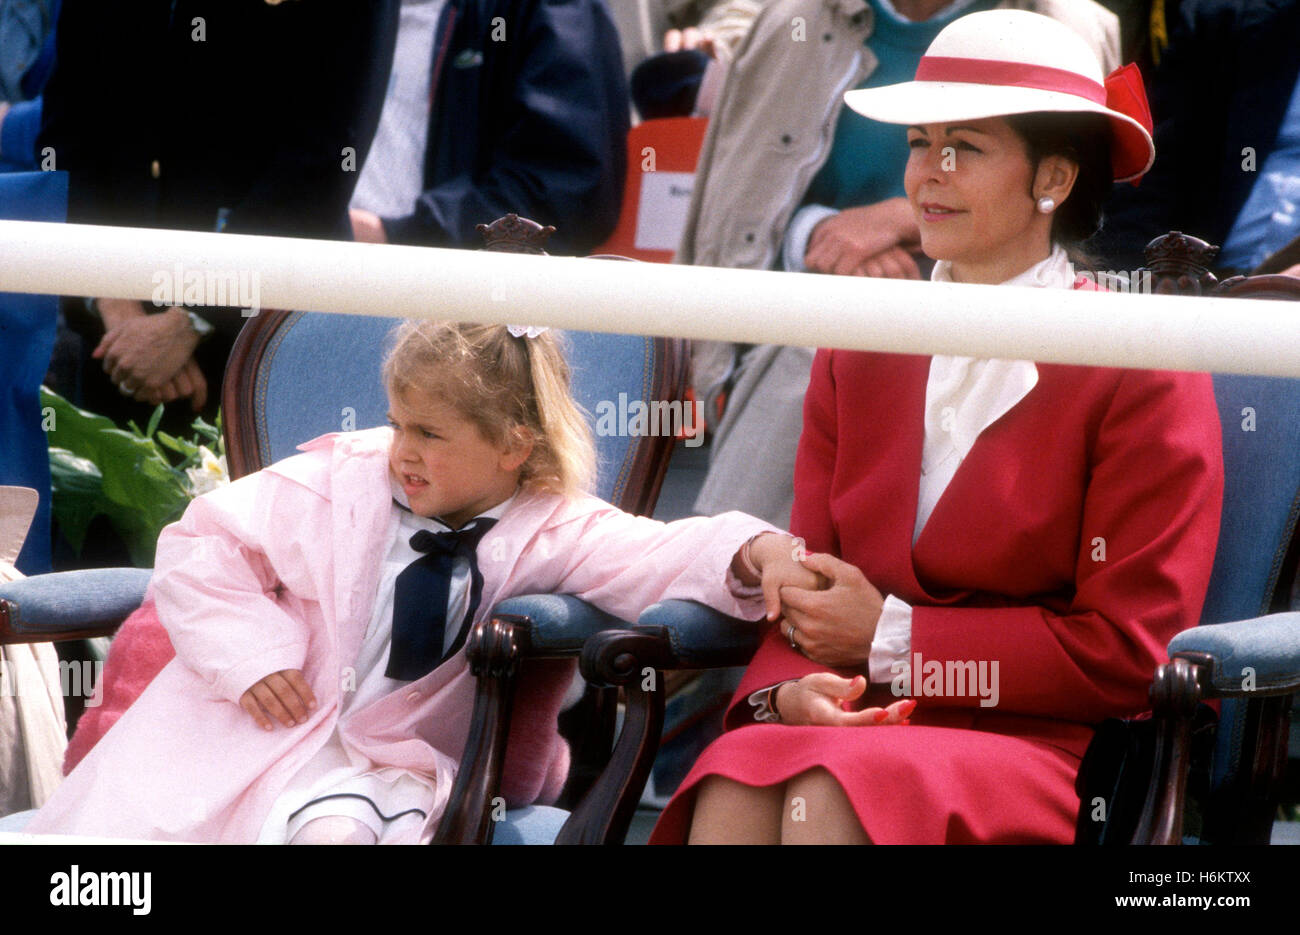 queen-silvia-and-princess-madeleine-at-stockholm-horse-show-1985-H6KTXX.jpg